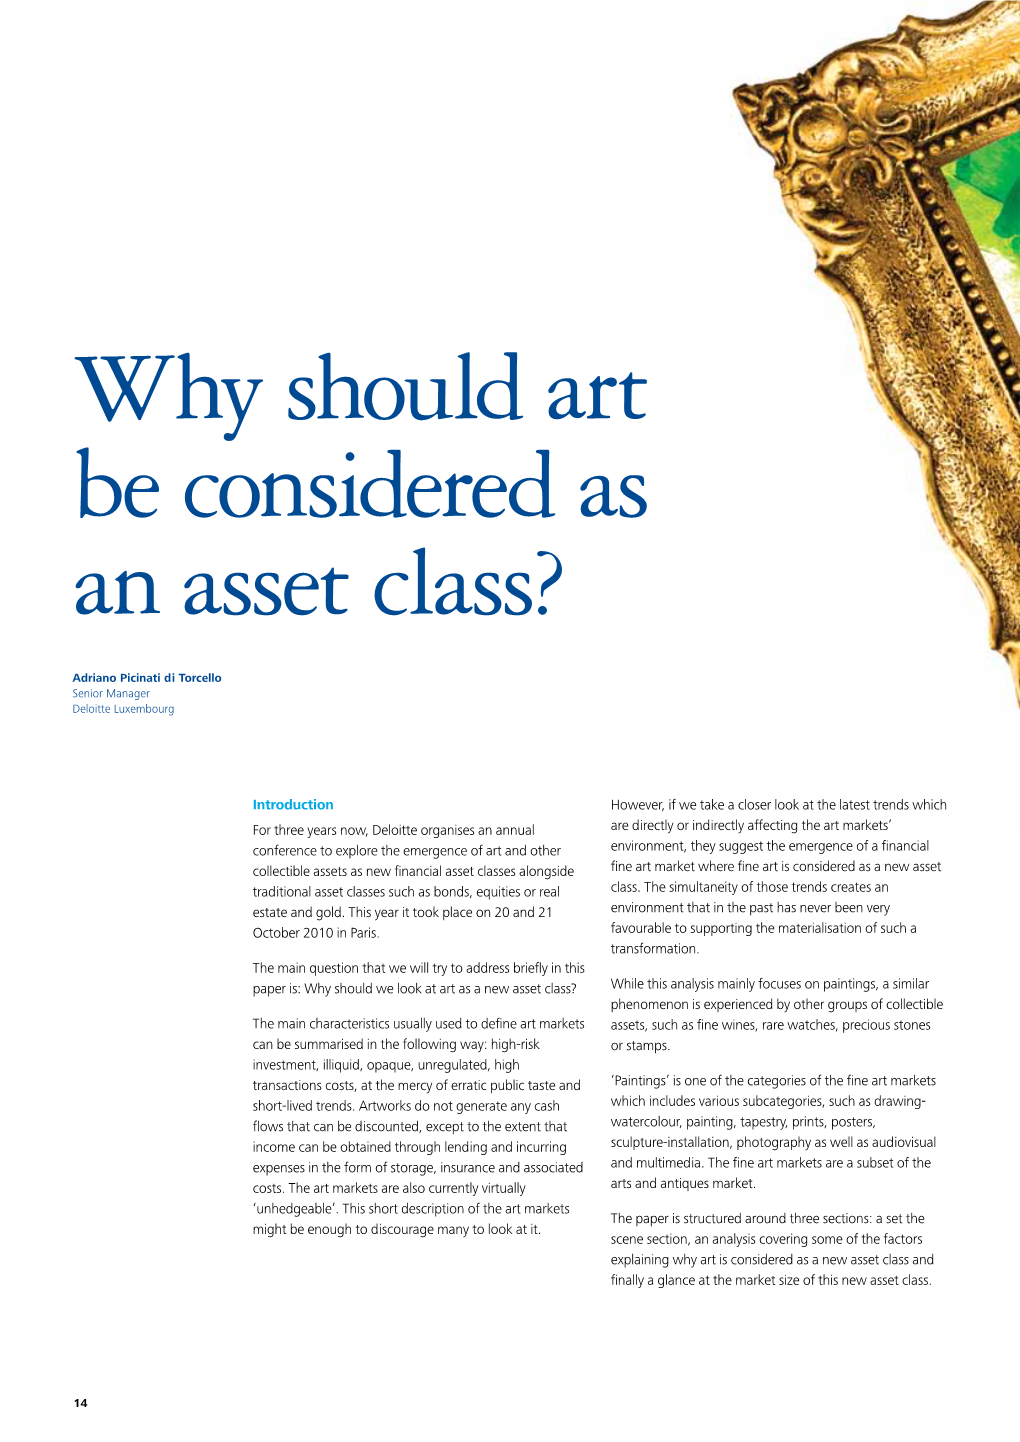 Why Should Art Be Considered As an Asset Class?